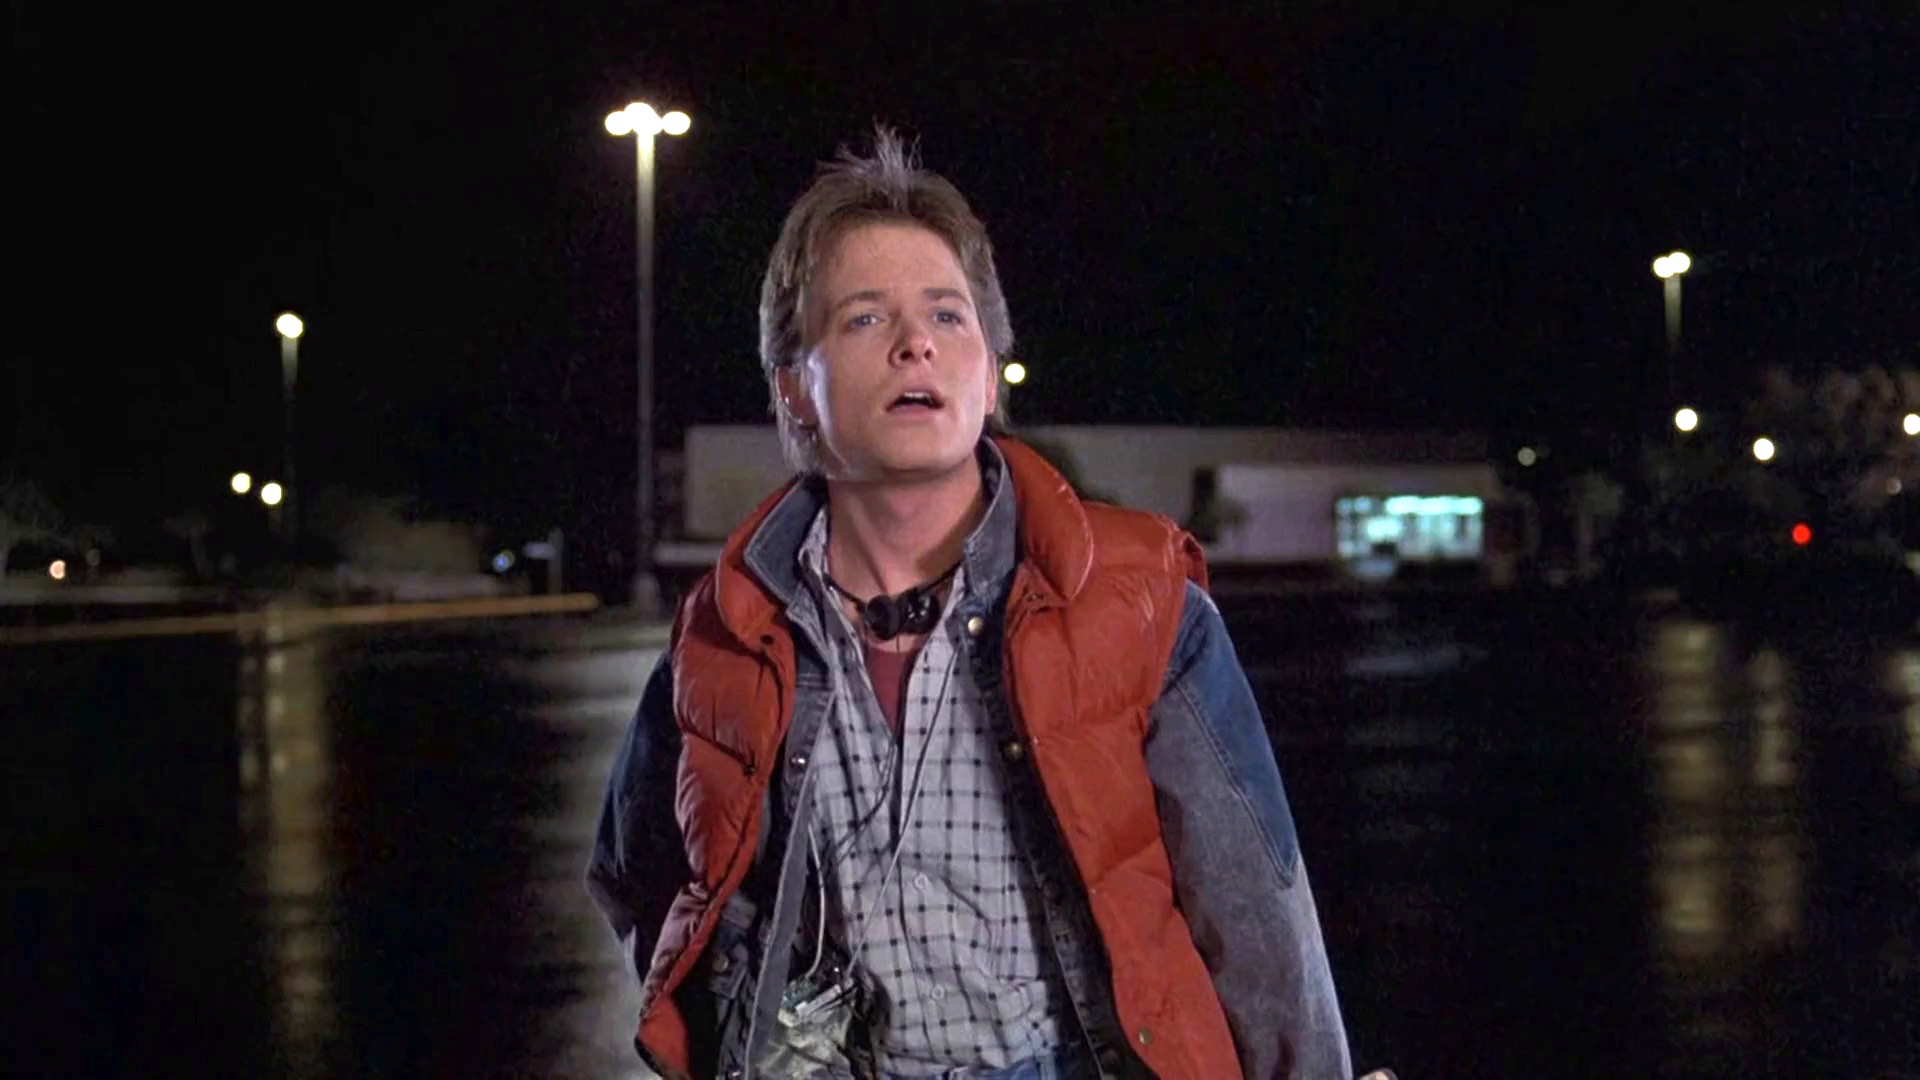 Prove You’re a Film Expert by Scoring 16/20 on This Totally Random Movie Character Quiz Marty McFly in Back to the Future